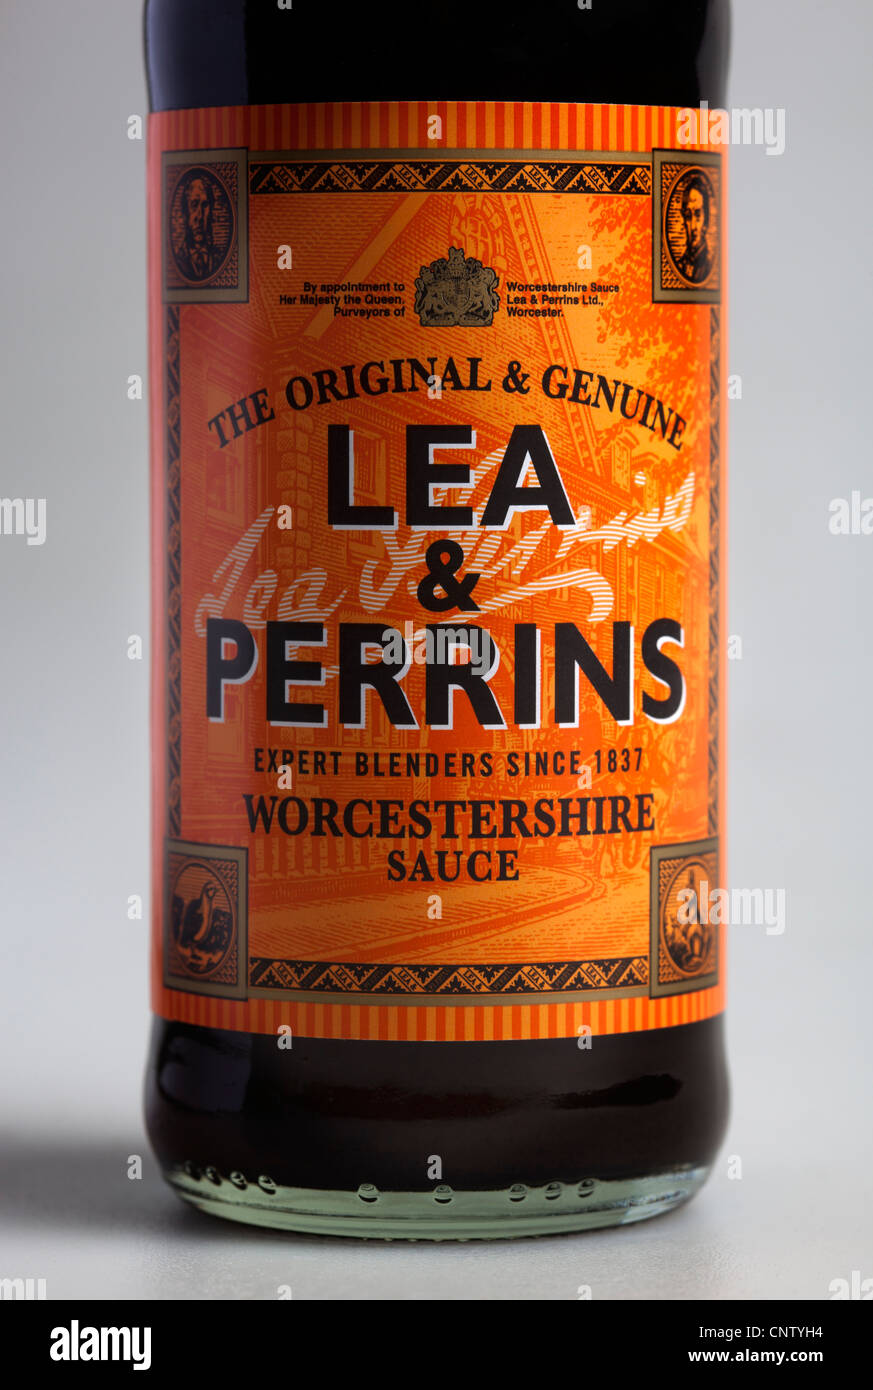 Worcestershire Sauce High Resolution Stock Photography And Images Alamy,Gluten Free Dairy Free Cake Recipe